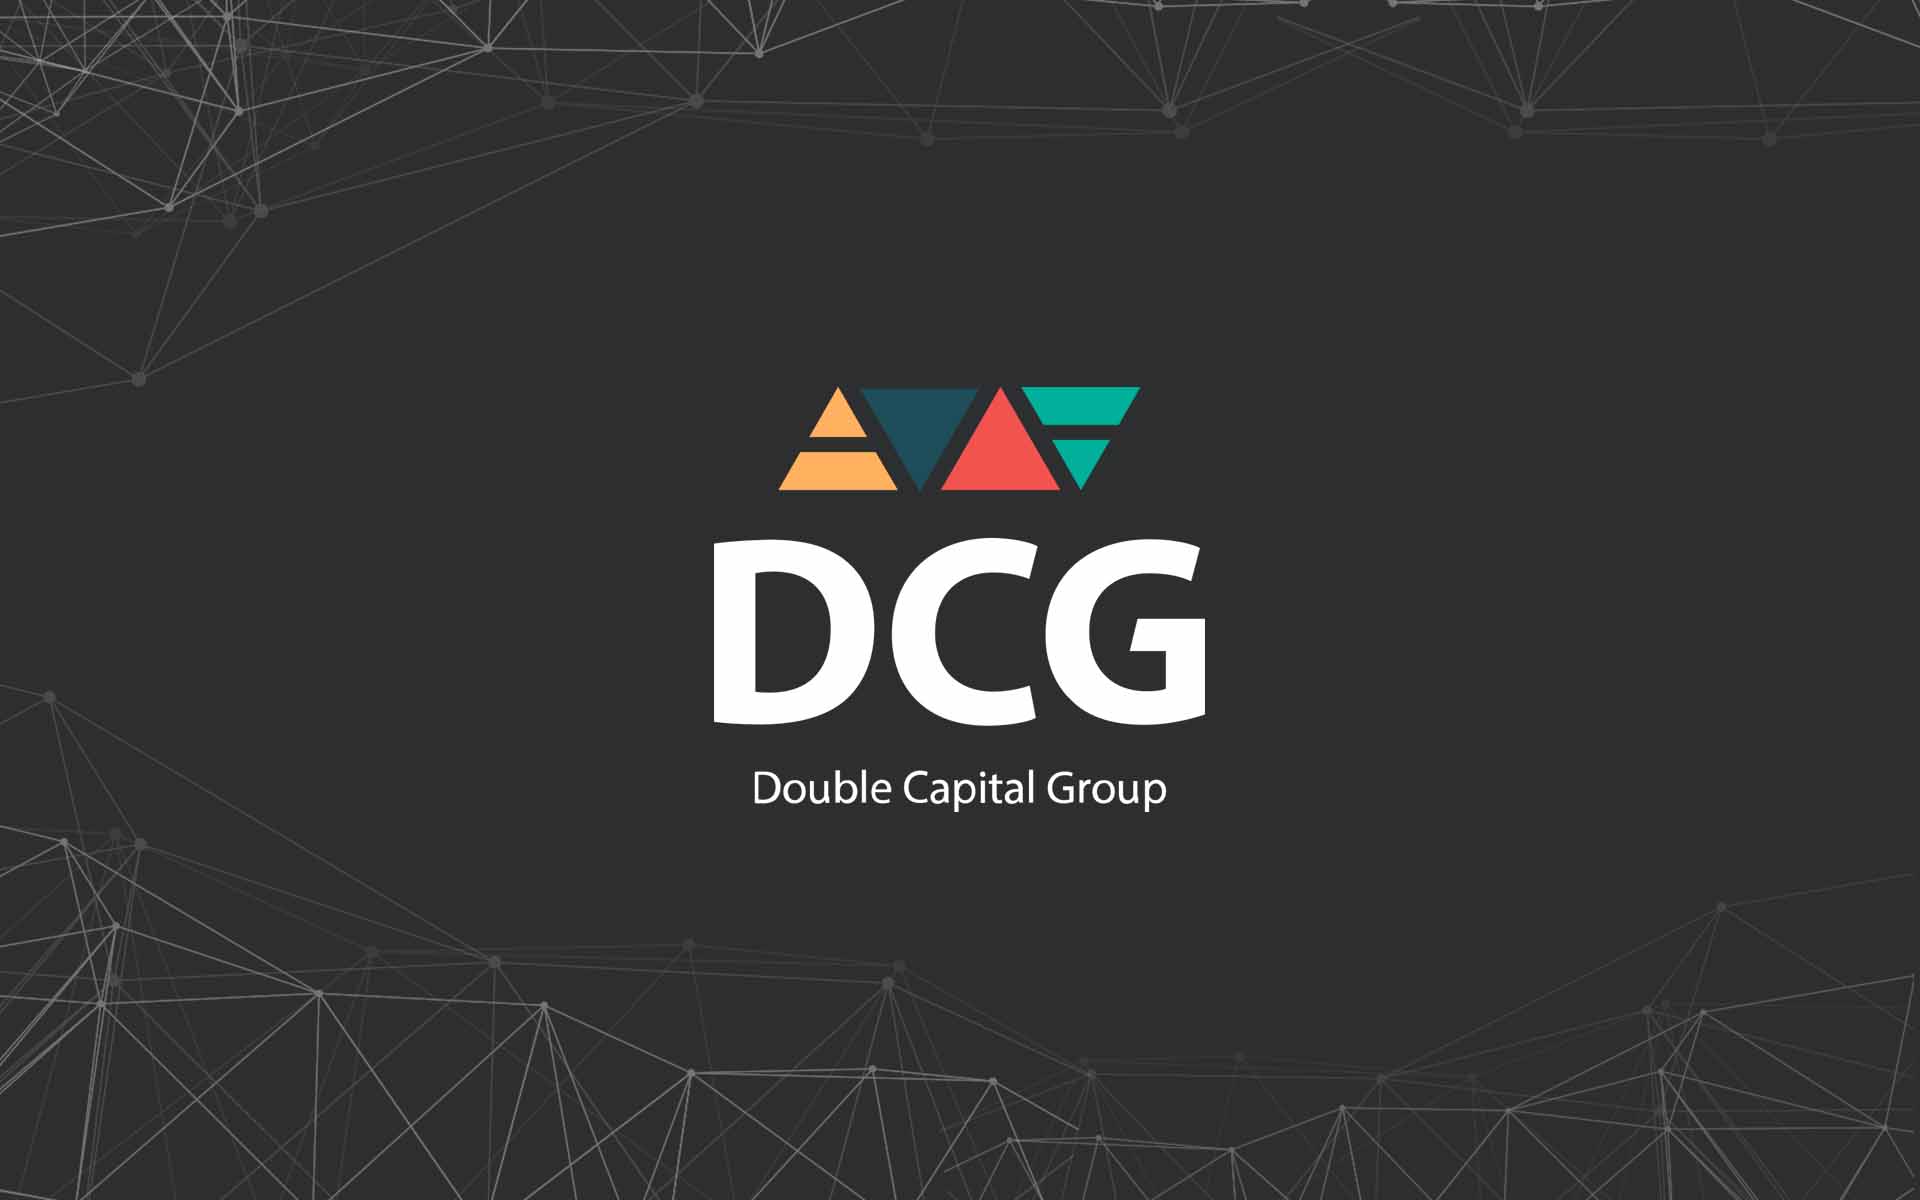 Double Capital Group Launches World's First Cryptocurrency Indexation and Analysis Service